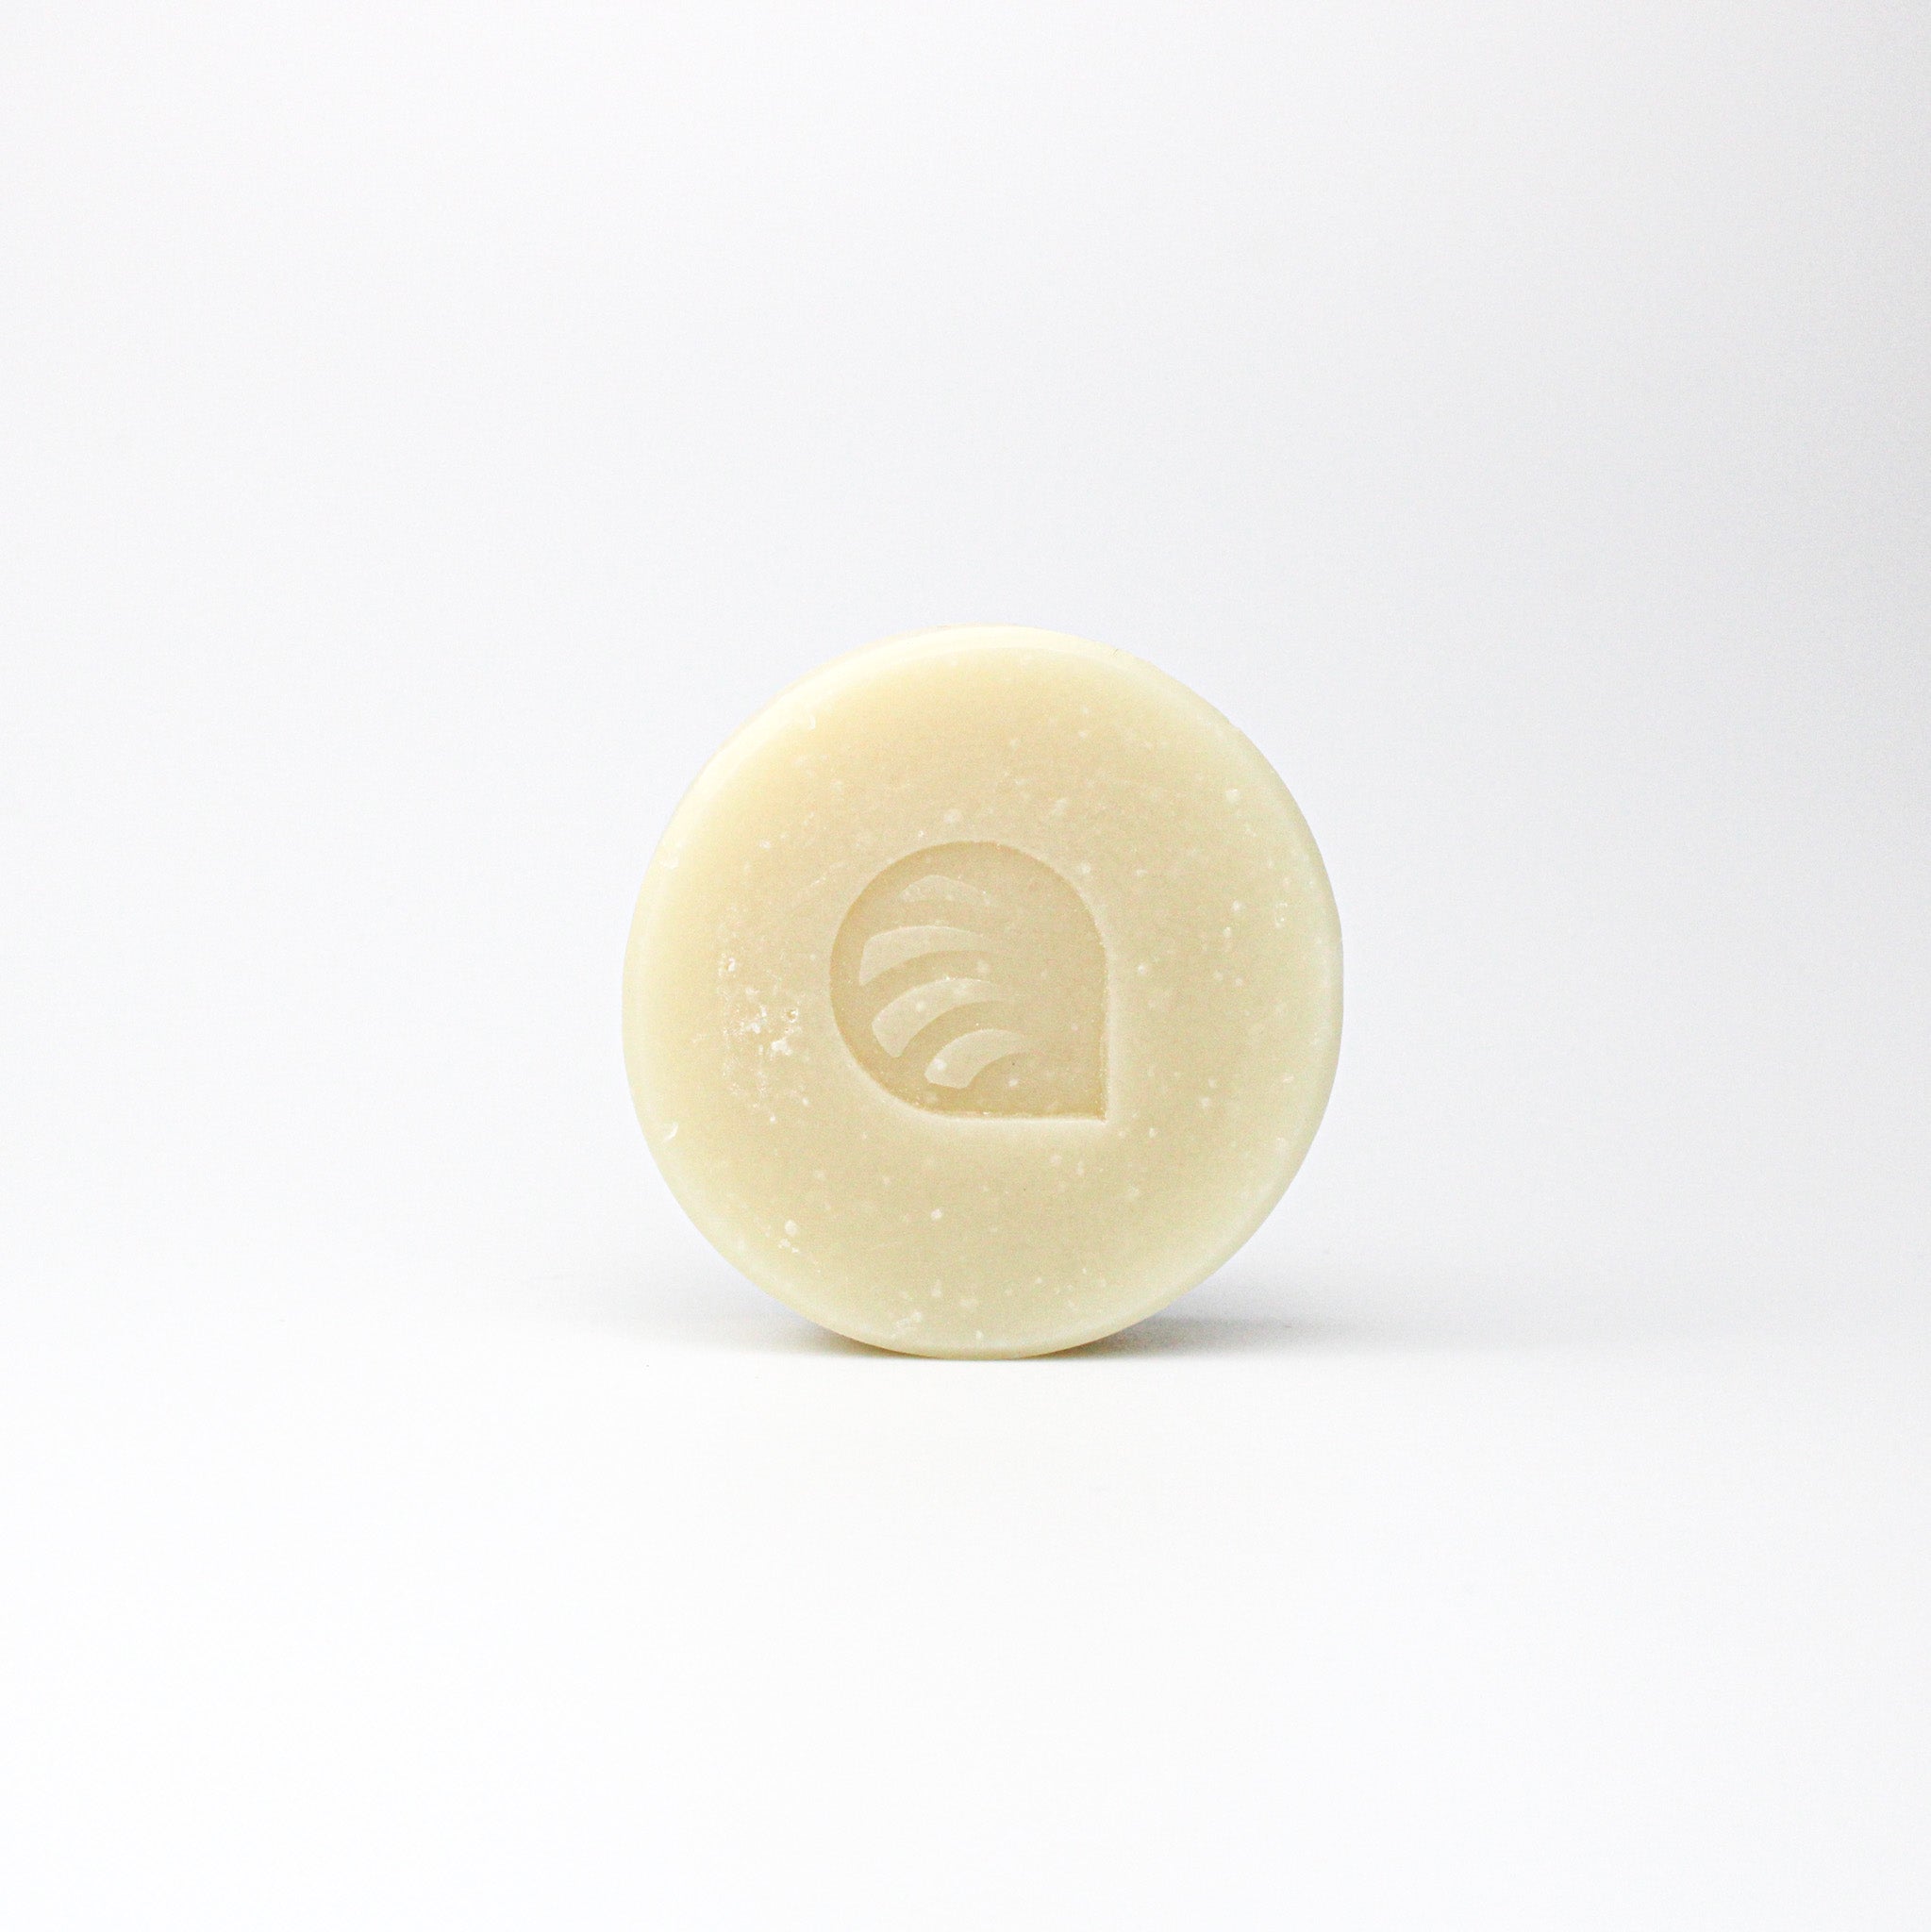 Package-free unscented soap. Made in Calgary.